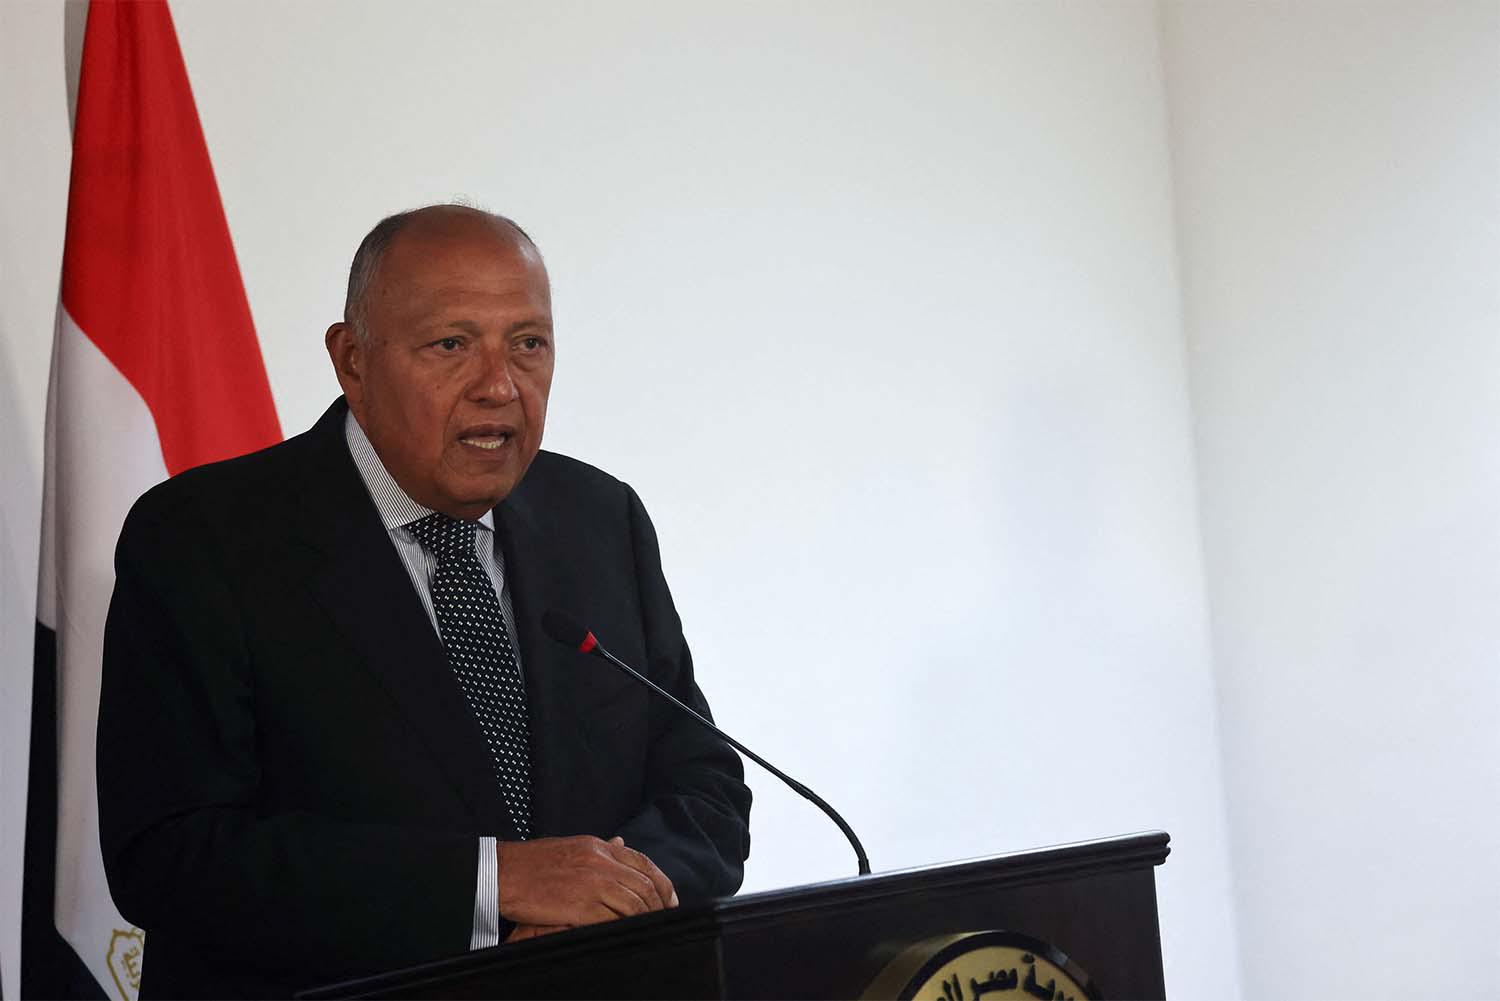 Shoukry: we will still exert every effort with our brothers in Qatar and the US and others close to the negotiations